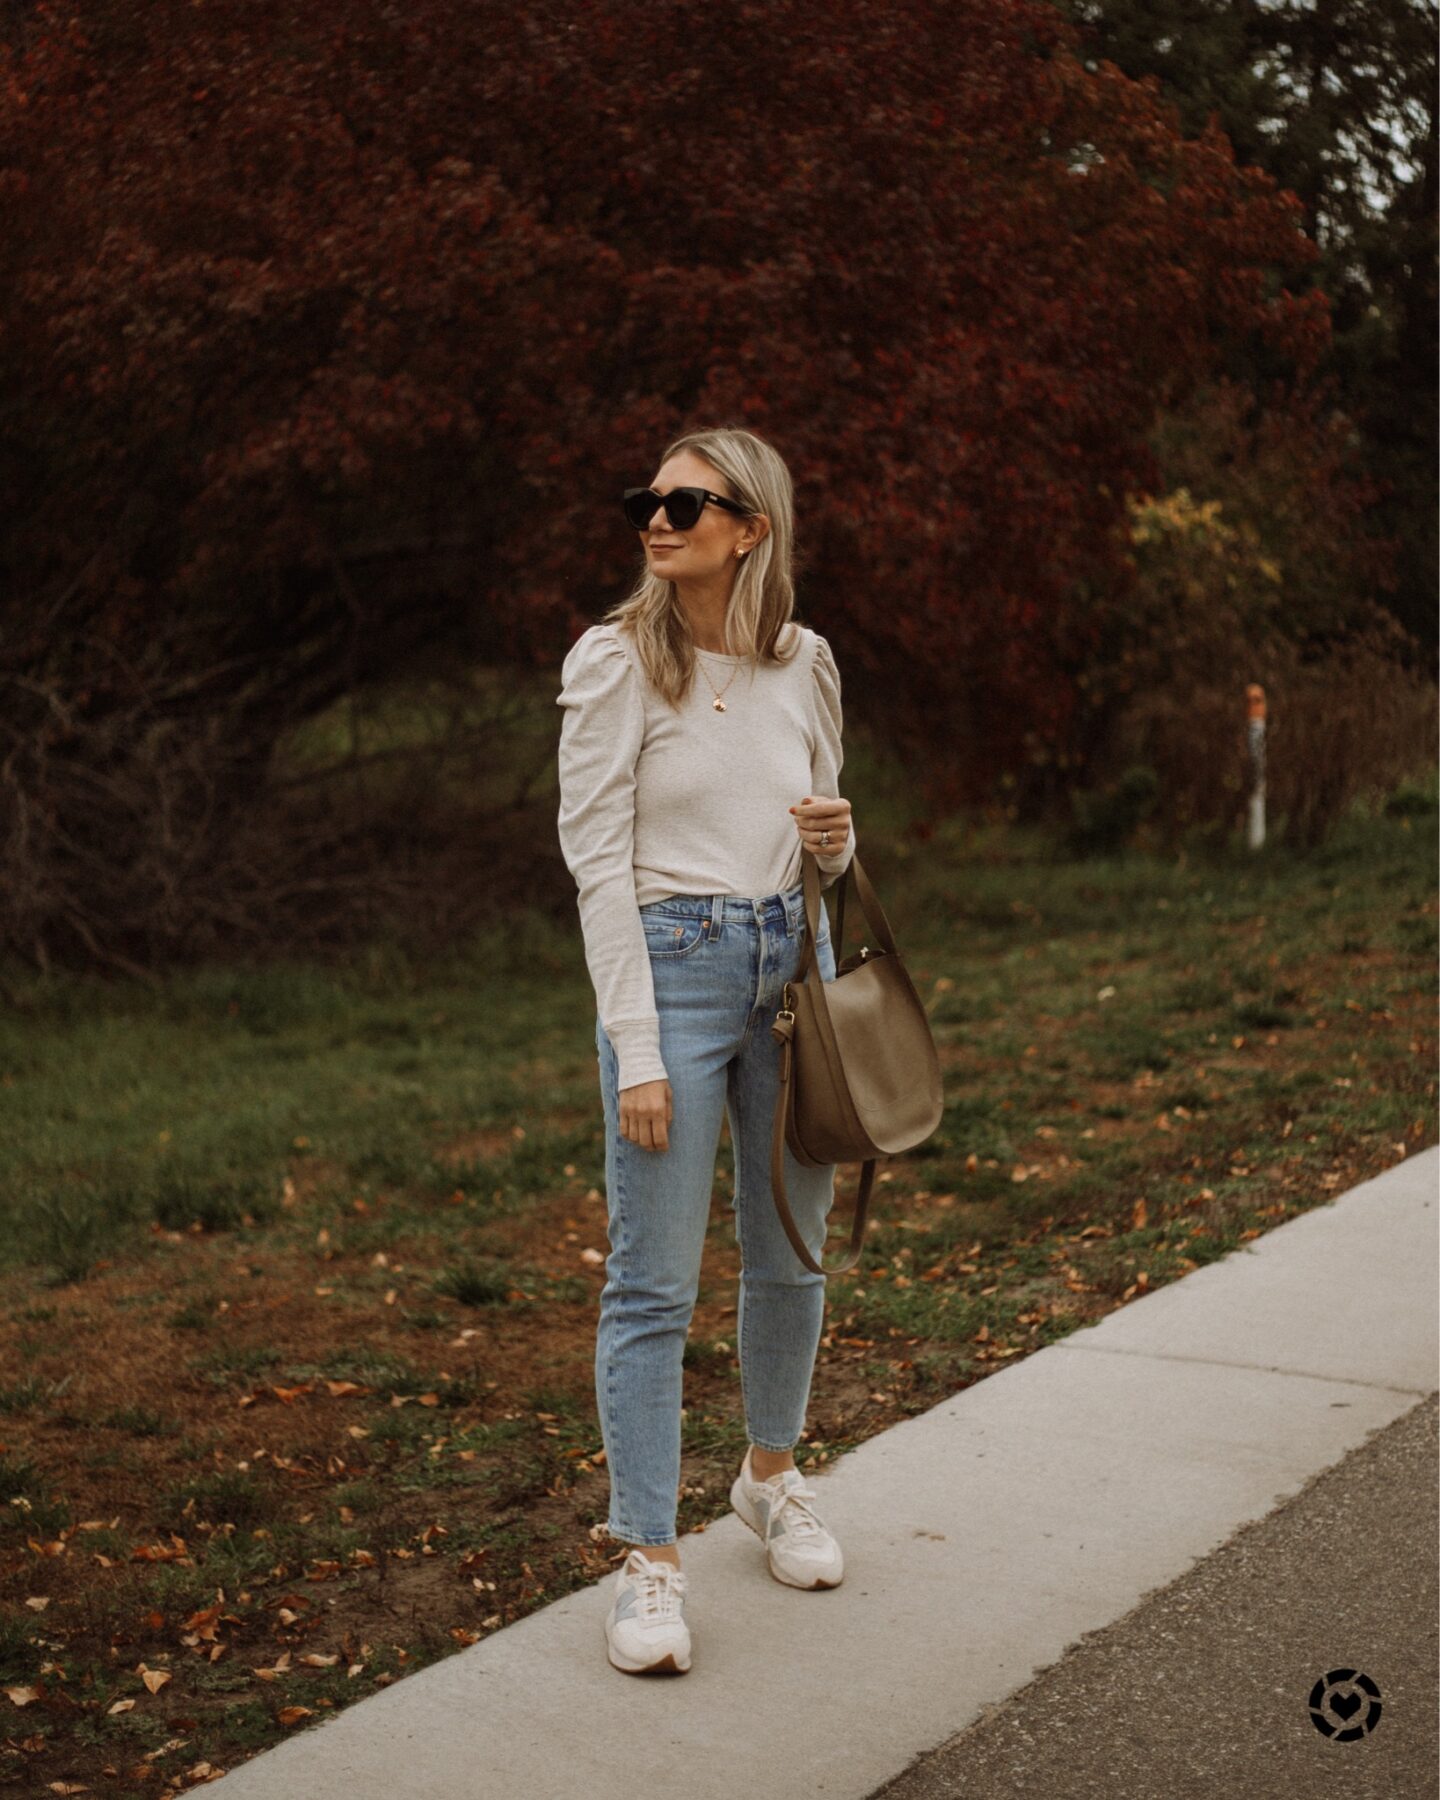 karin emily wears a puff sleeved top, light wash jeans, and new balance sneakers